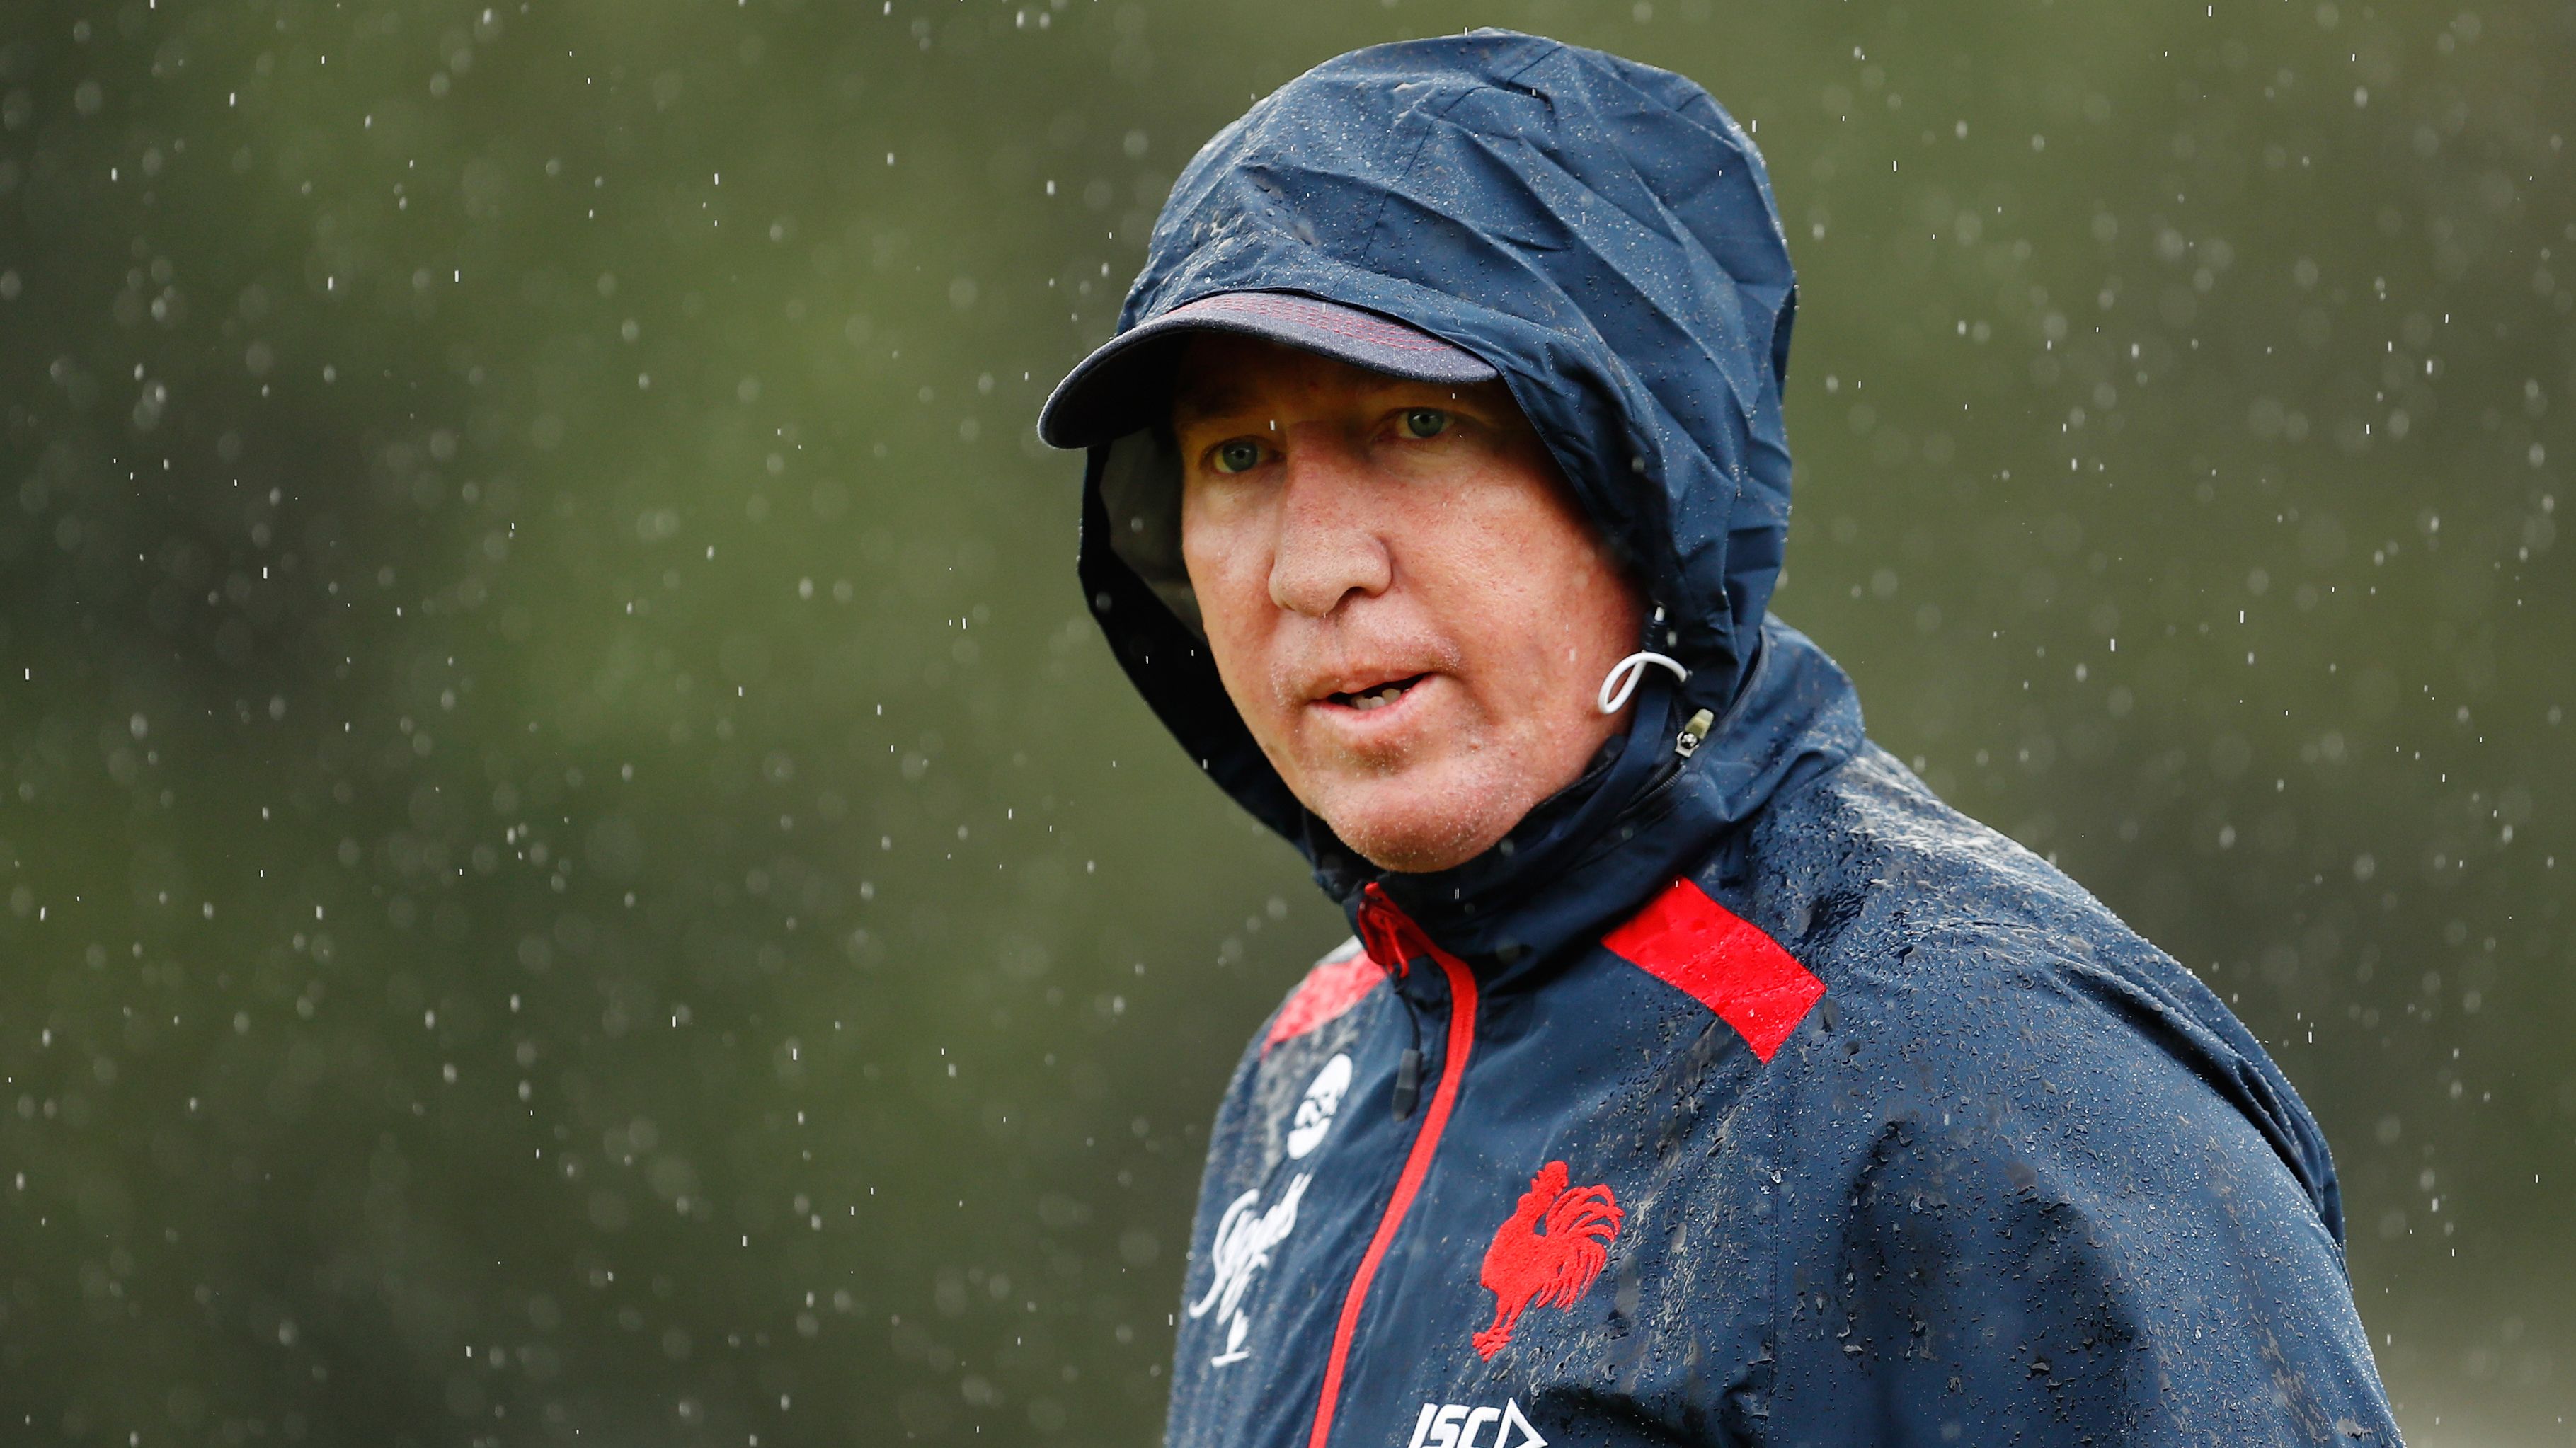 Roosters coach Trent Robinson cleared of coronavirus after being tested for COVID-19